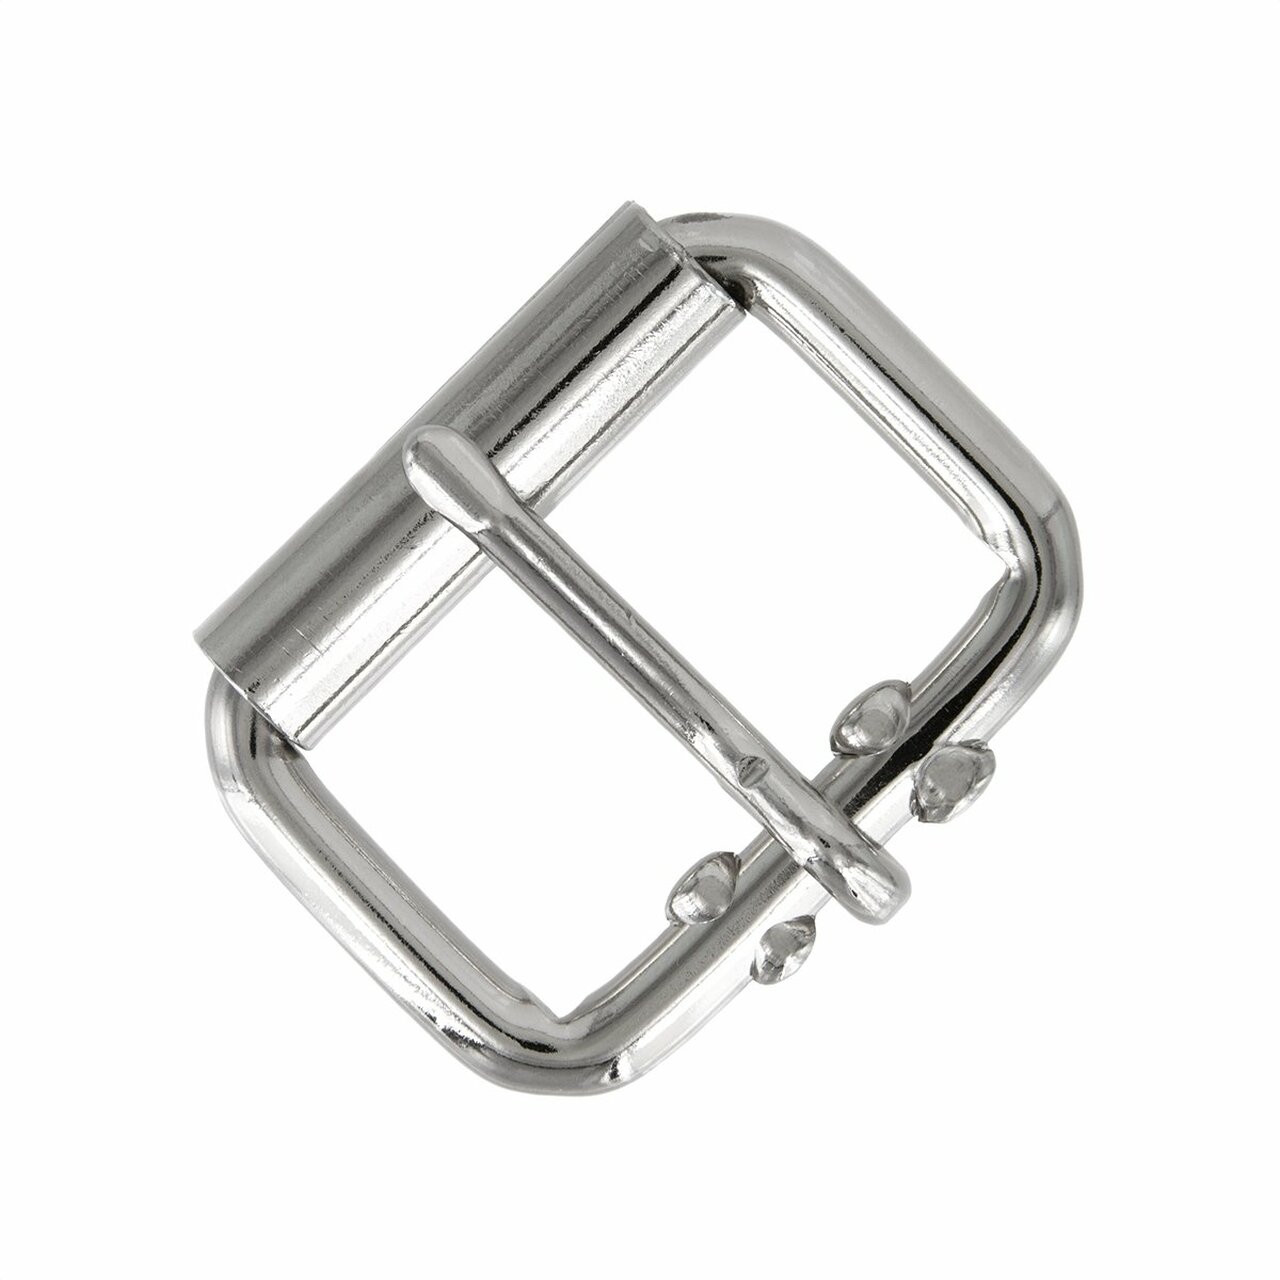 30 Mm Nickel Single Roller Buckles. Strong Buckles for Straps